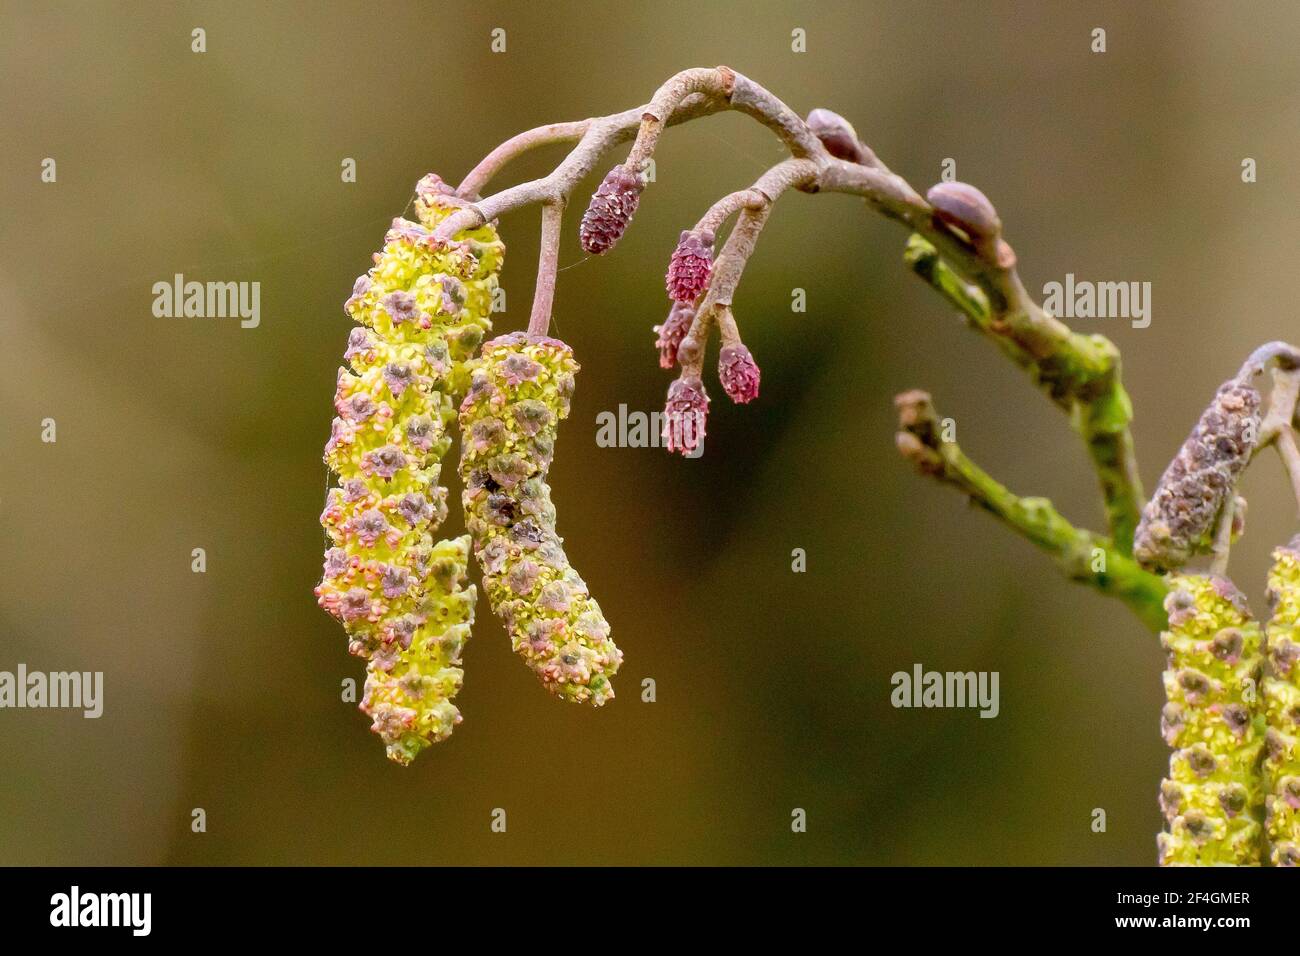 Alder (alnus glutinosa), close up showing the large male catkins in flower and the smaller pinkish female flowers which produce the trees seed cones. Stock Photo